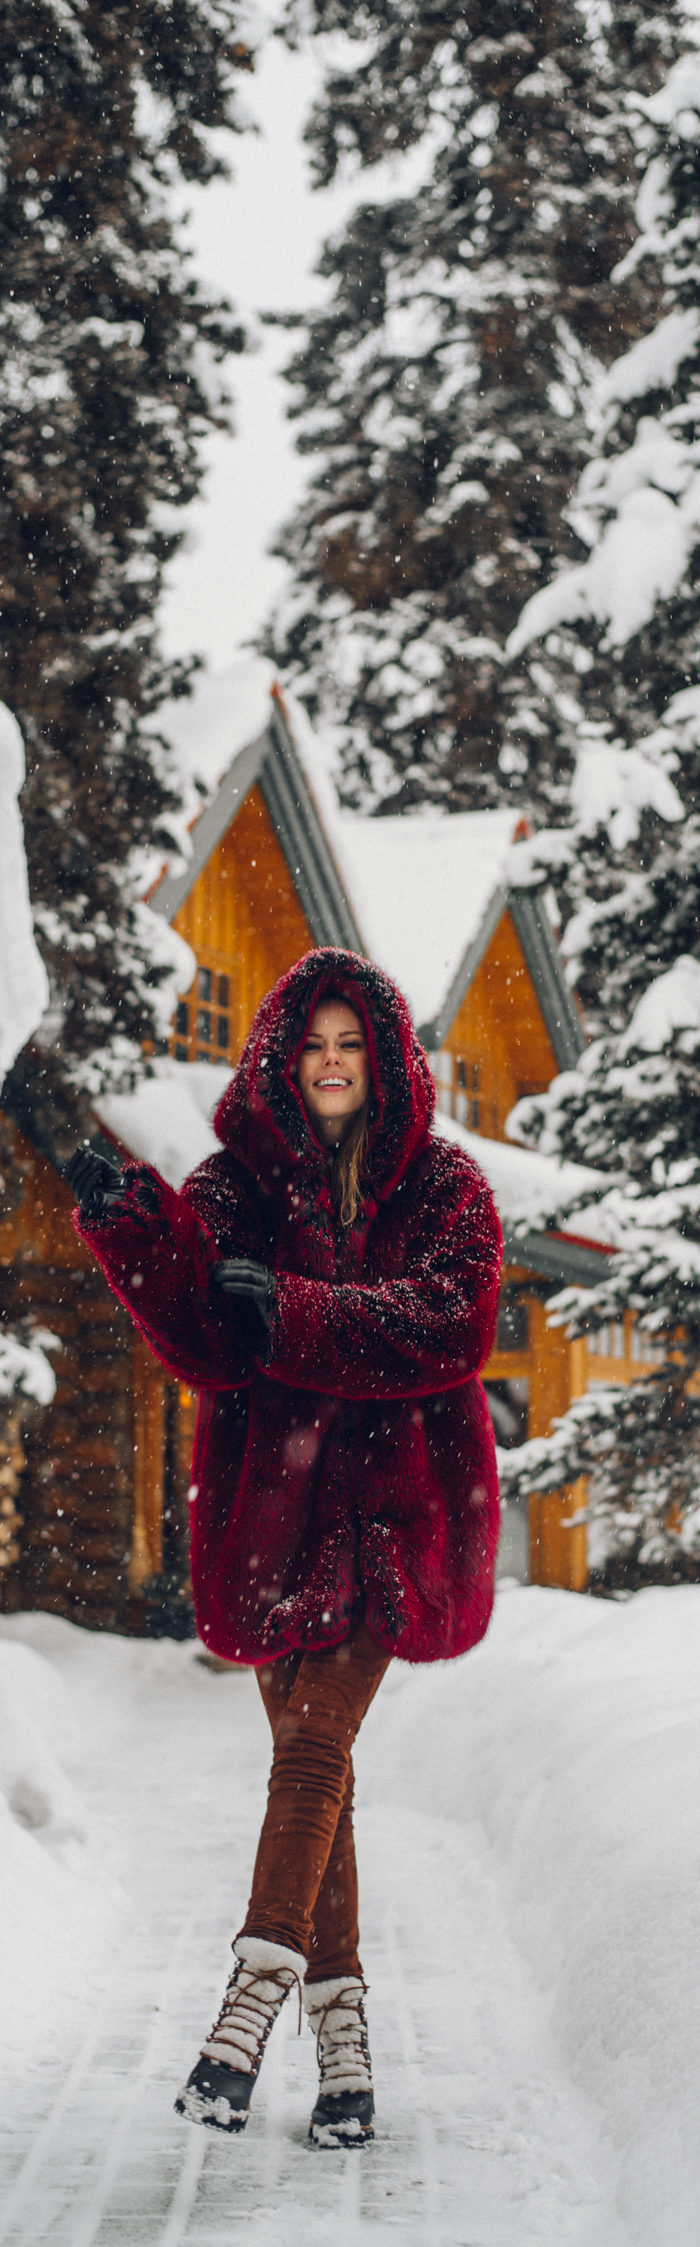 Alyssa Campanella of The A List blog experiences romance in the snow with her husband in Lake Louise, Alberta, Canada at Post Hotel